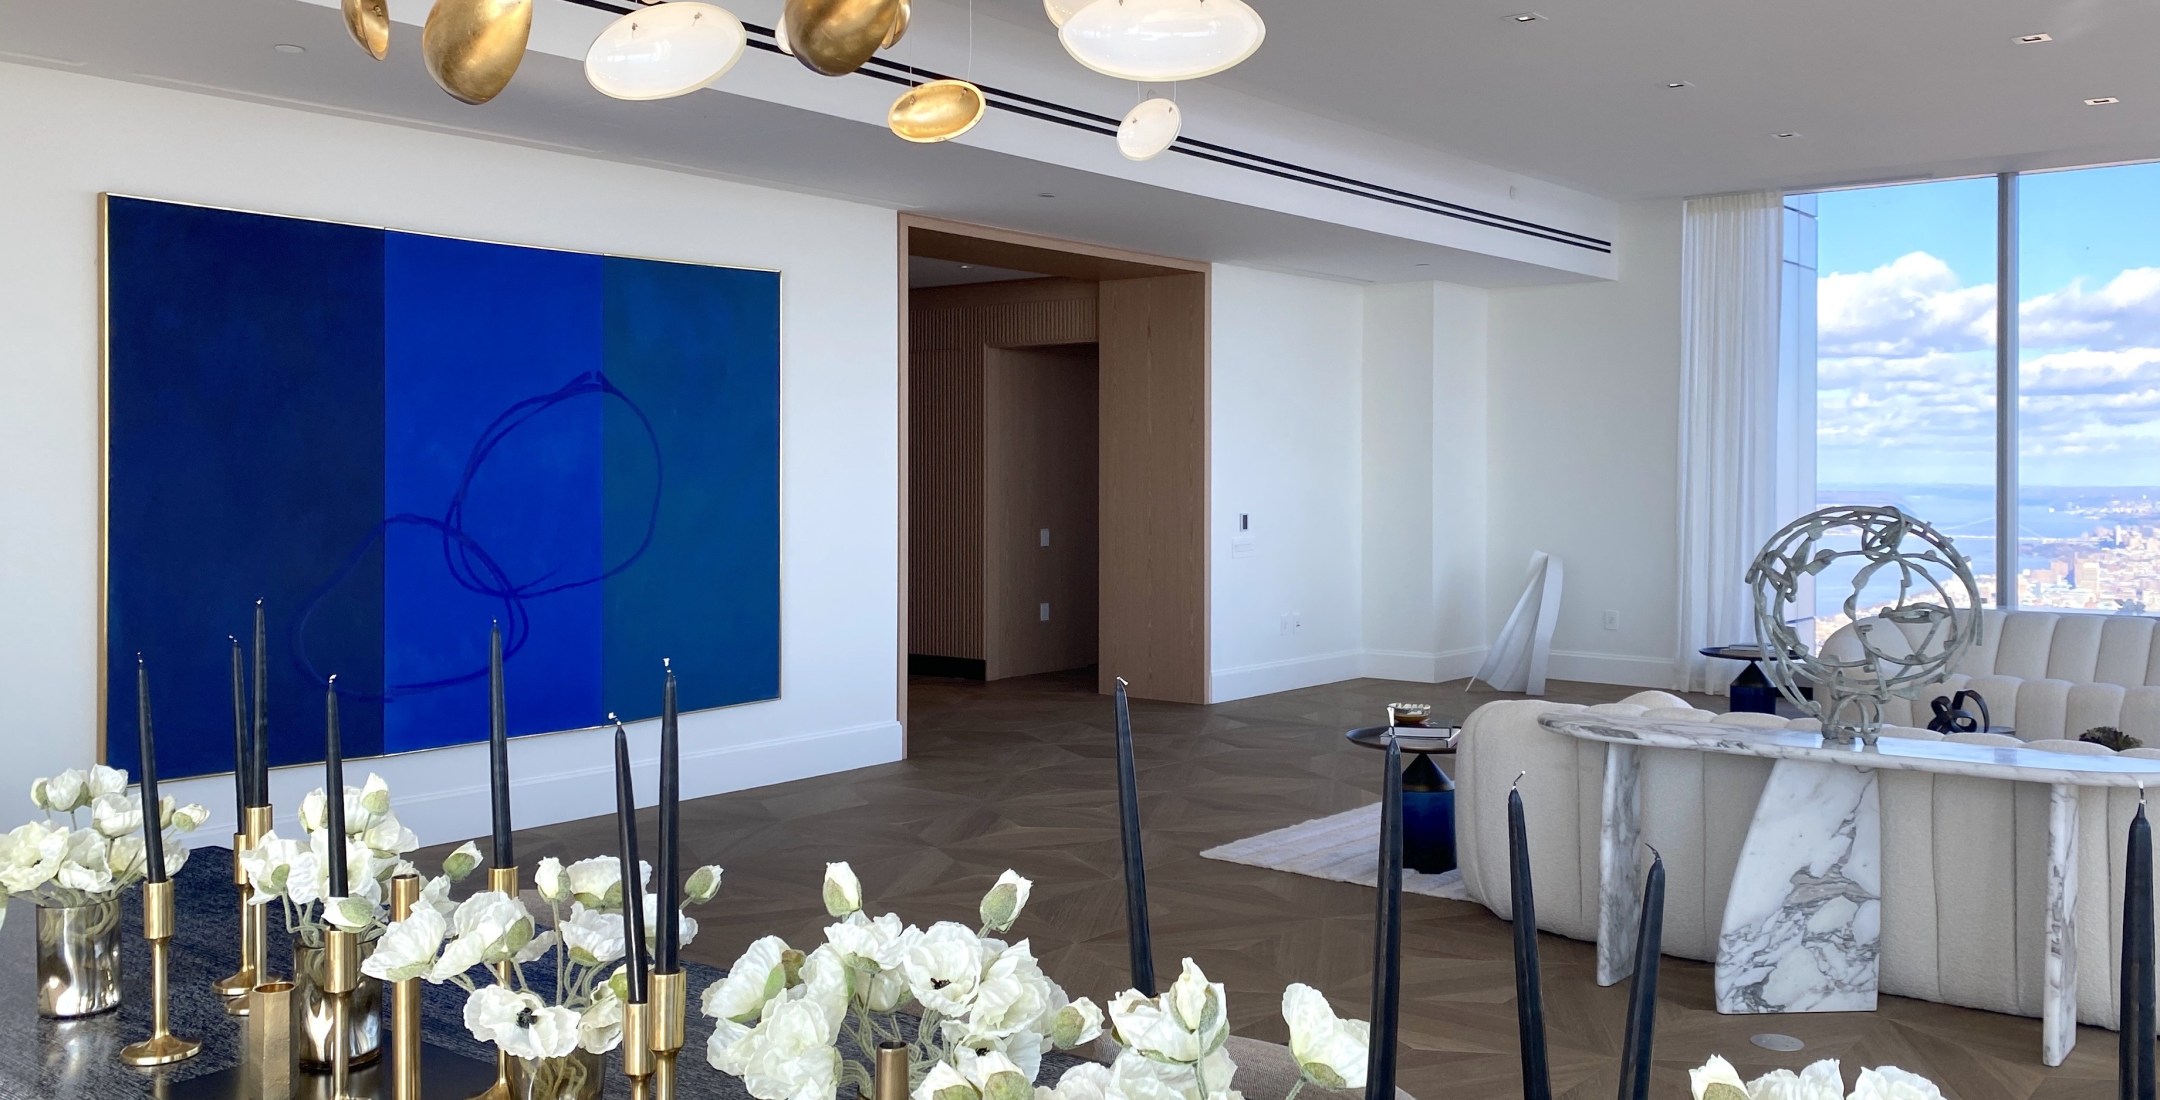 Loretta Howard Gallery presents a series of installations of art in homes and interiors. In this installation towering above midtown Manhattan, the art compliments the city below. For pricing information contact anthony@lorettahoward.com, &nbsp;